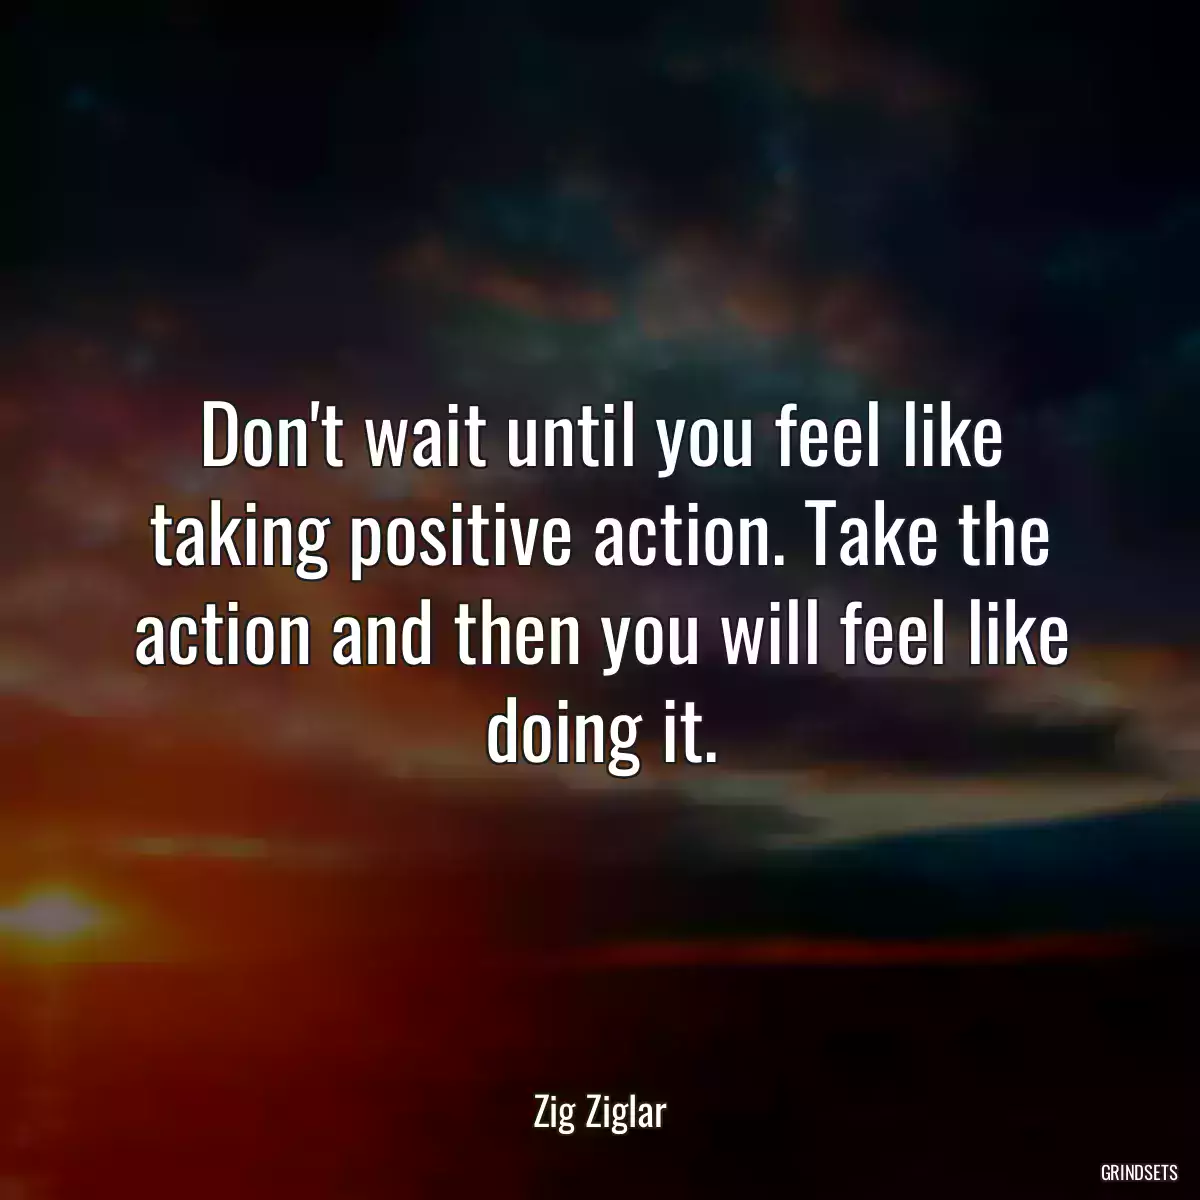 Don\'t wait until you feel like taking positive action. Take the action and then you will feel like doing it.